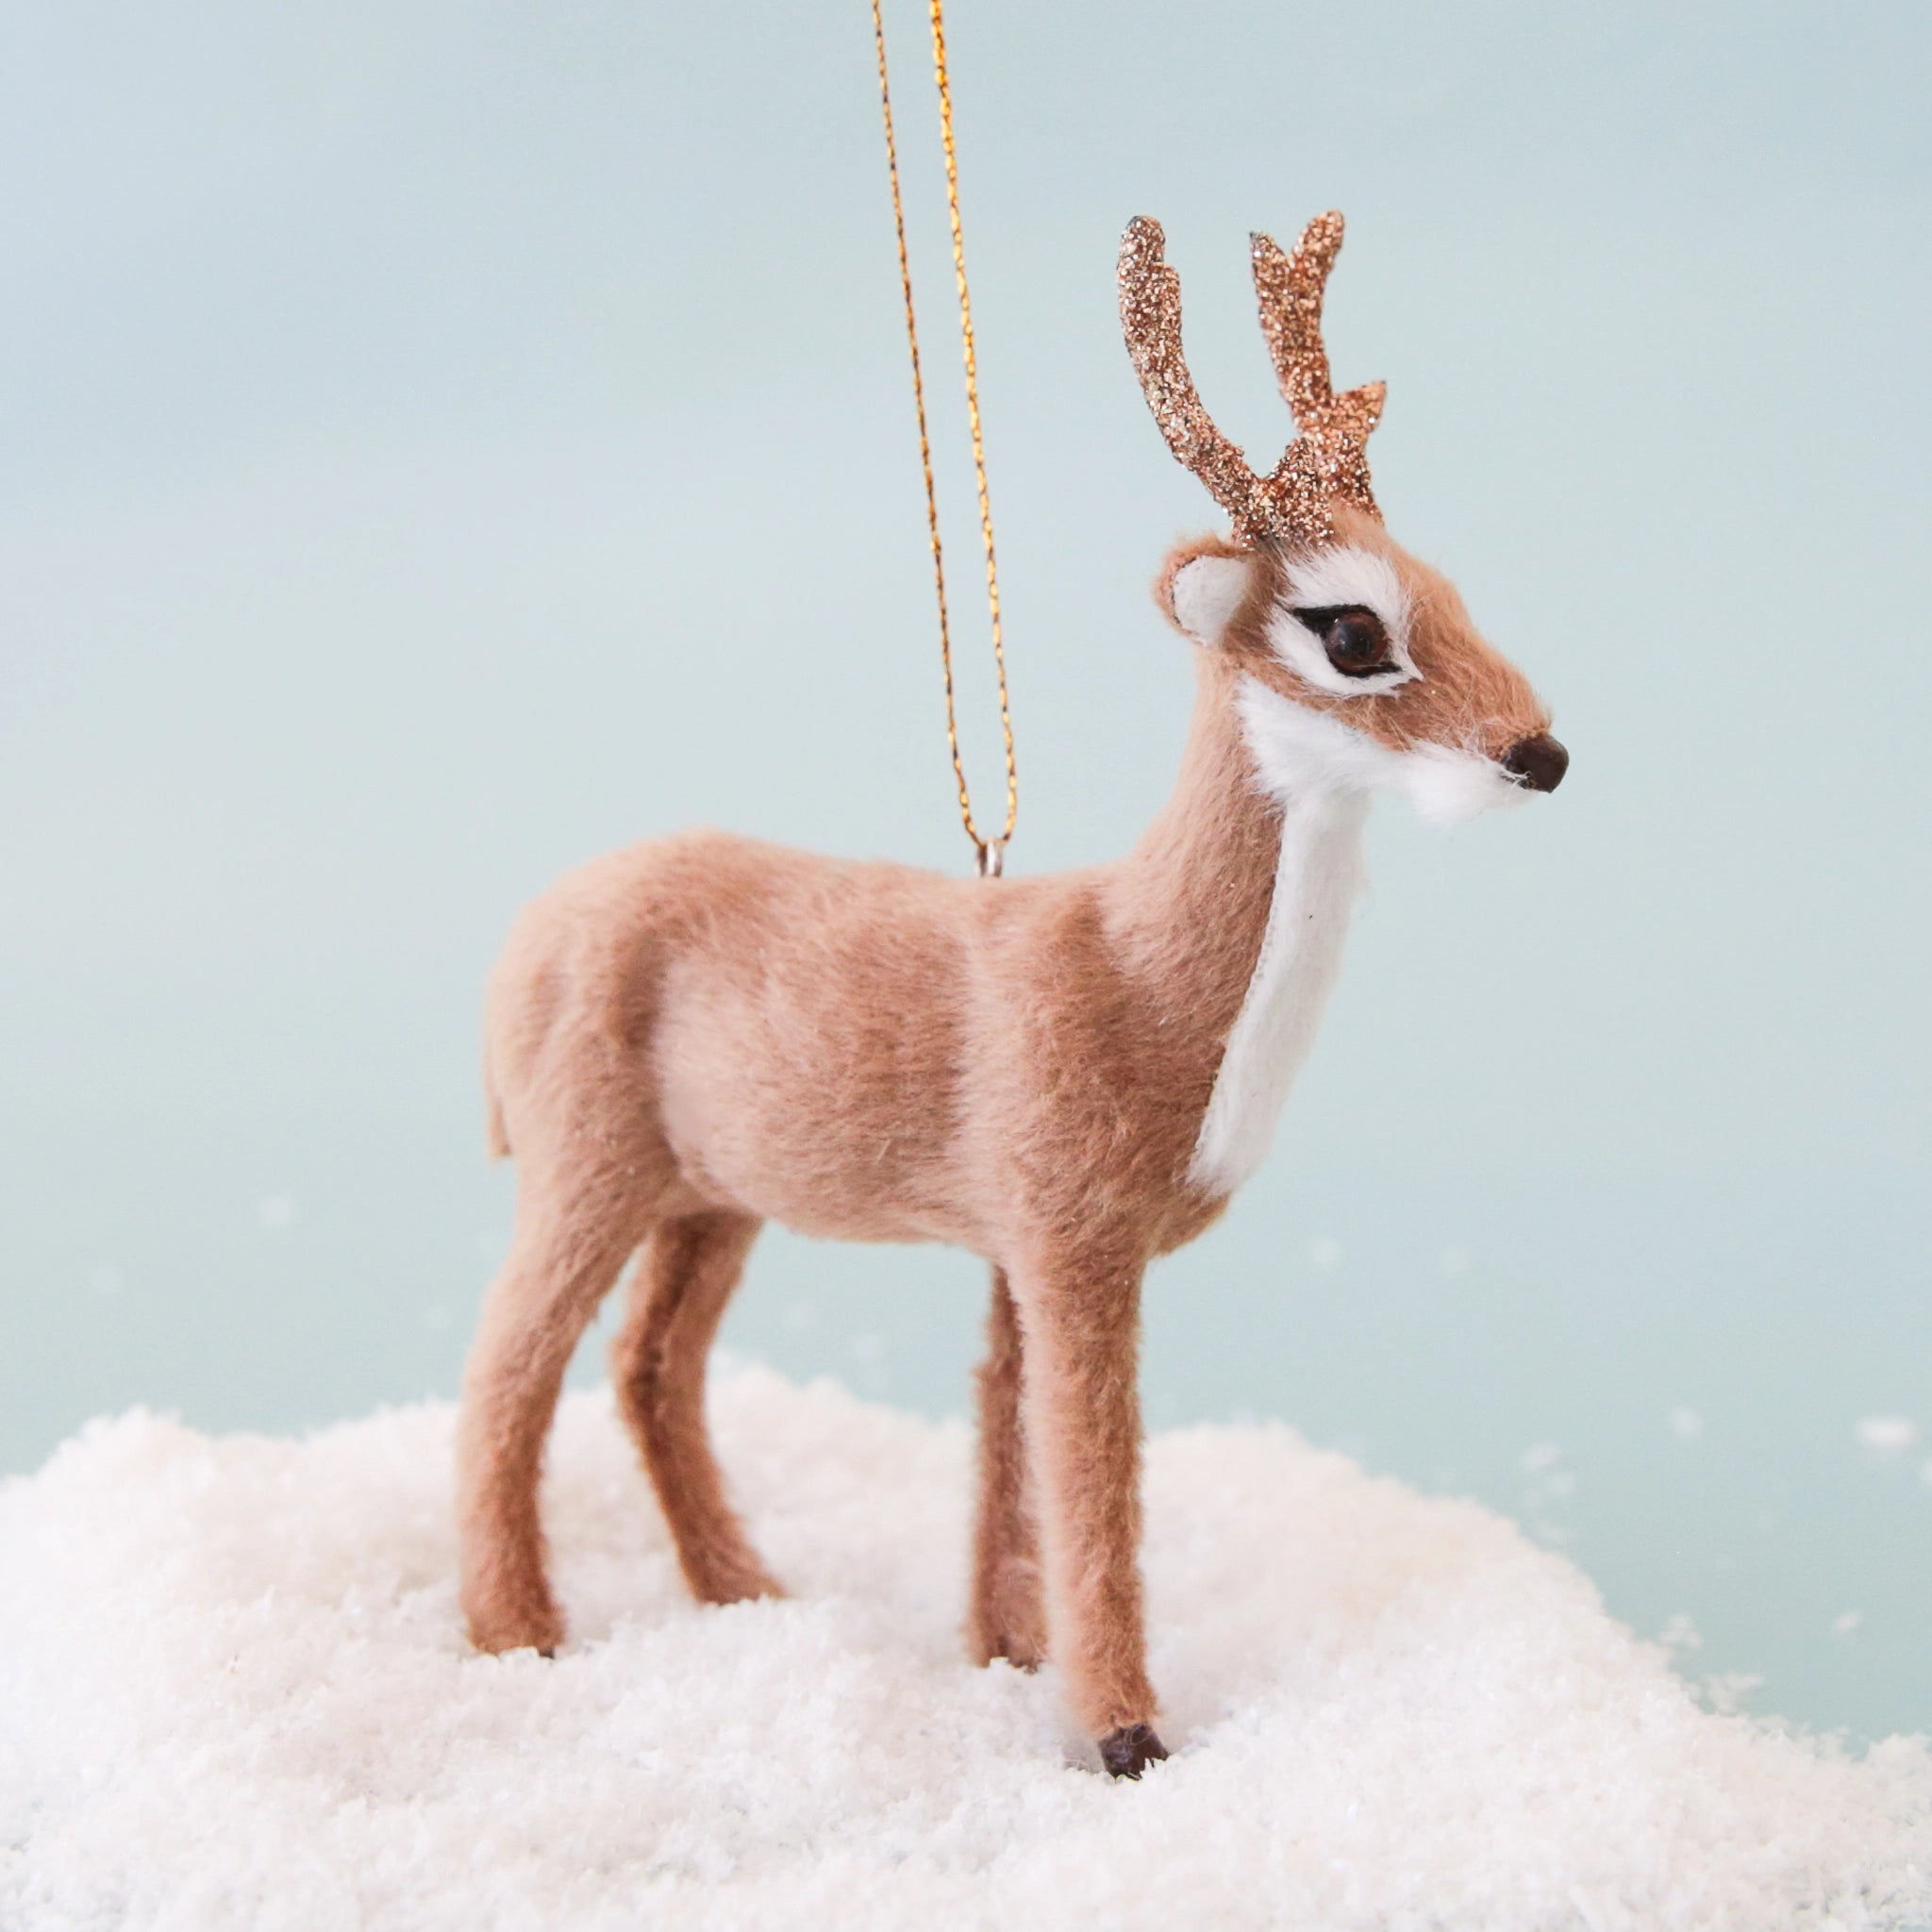 A furry white and brown stag holiday decor with glitter antlers.